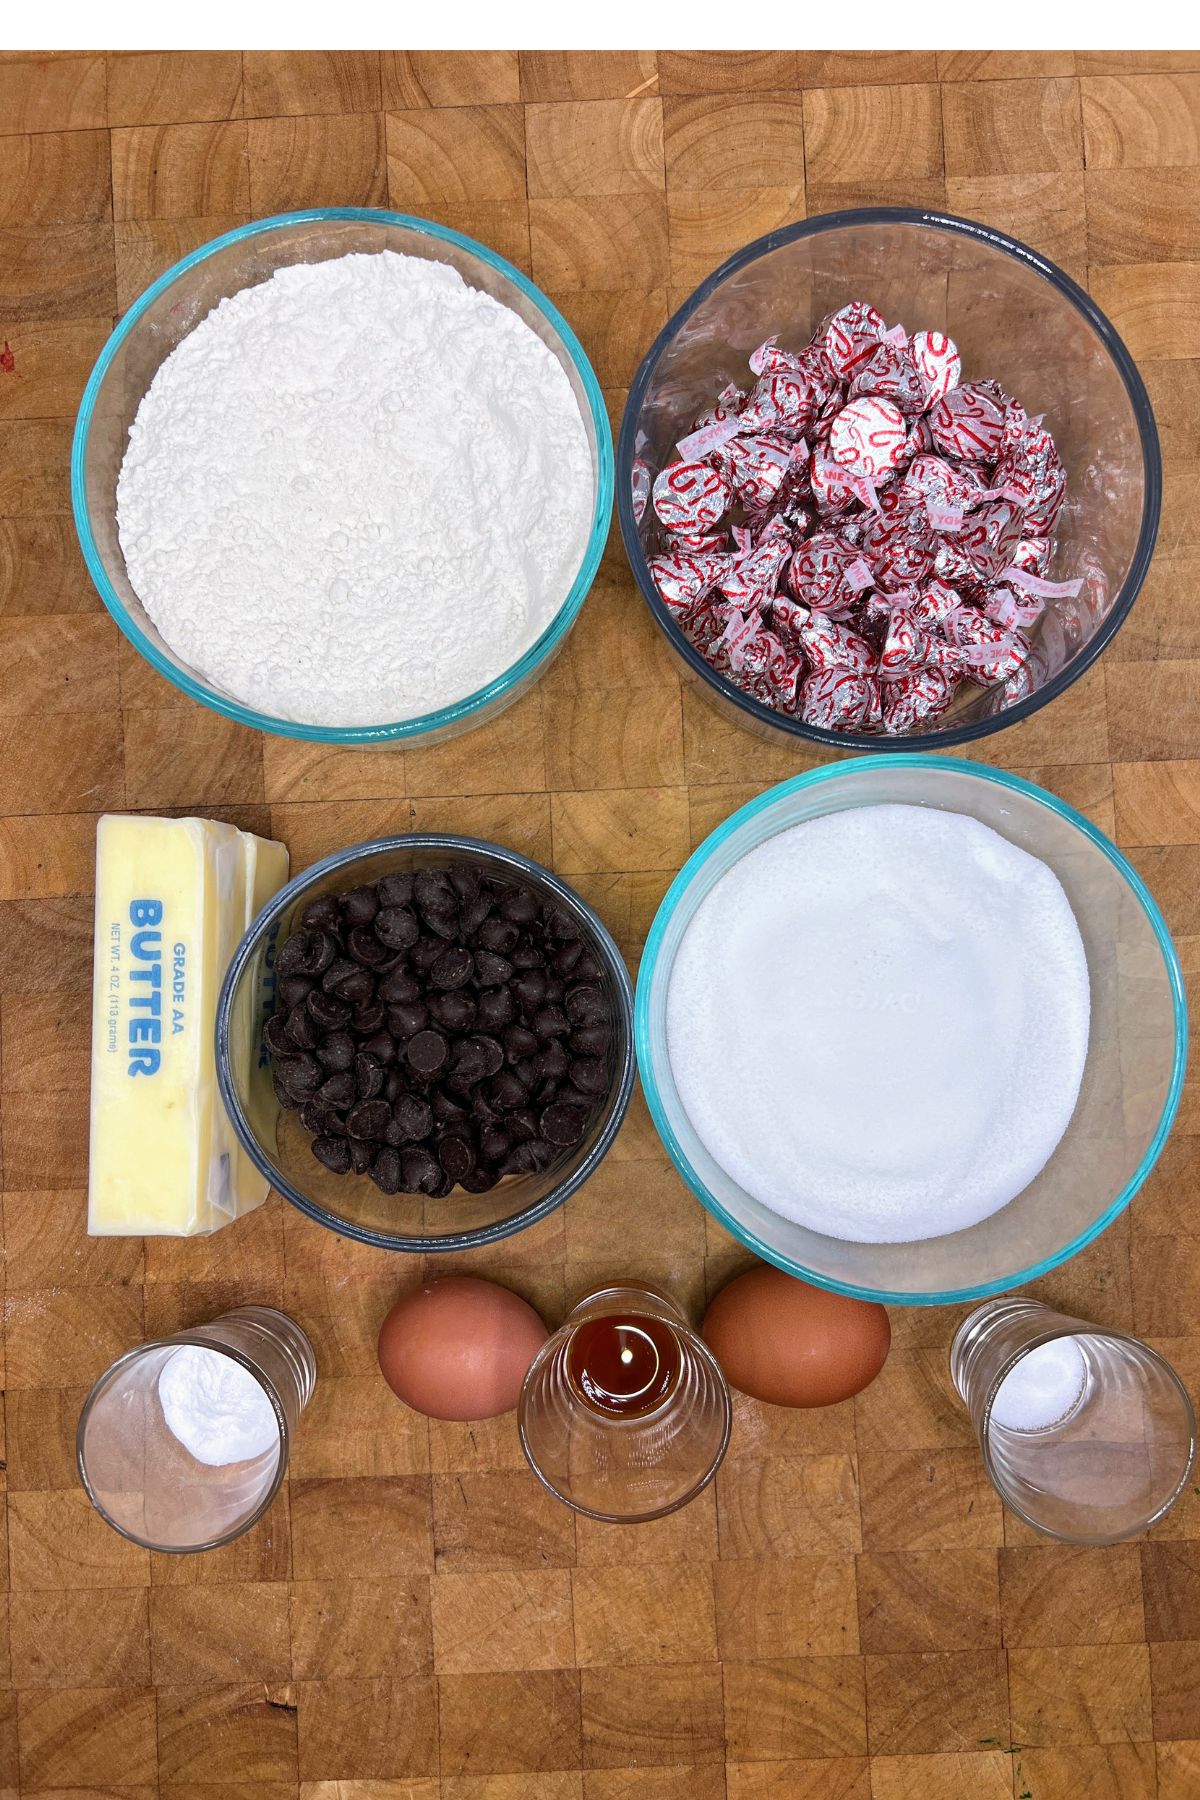 Ingredients for hershey kiss sugar cookies on a wooden table.